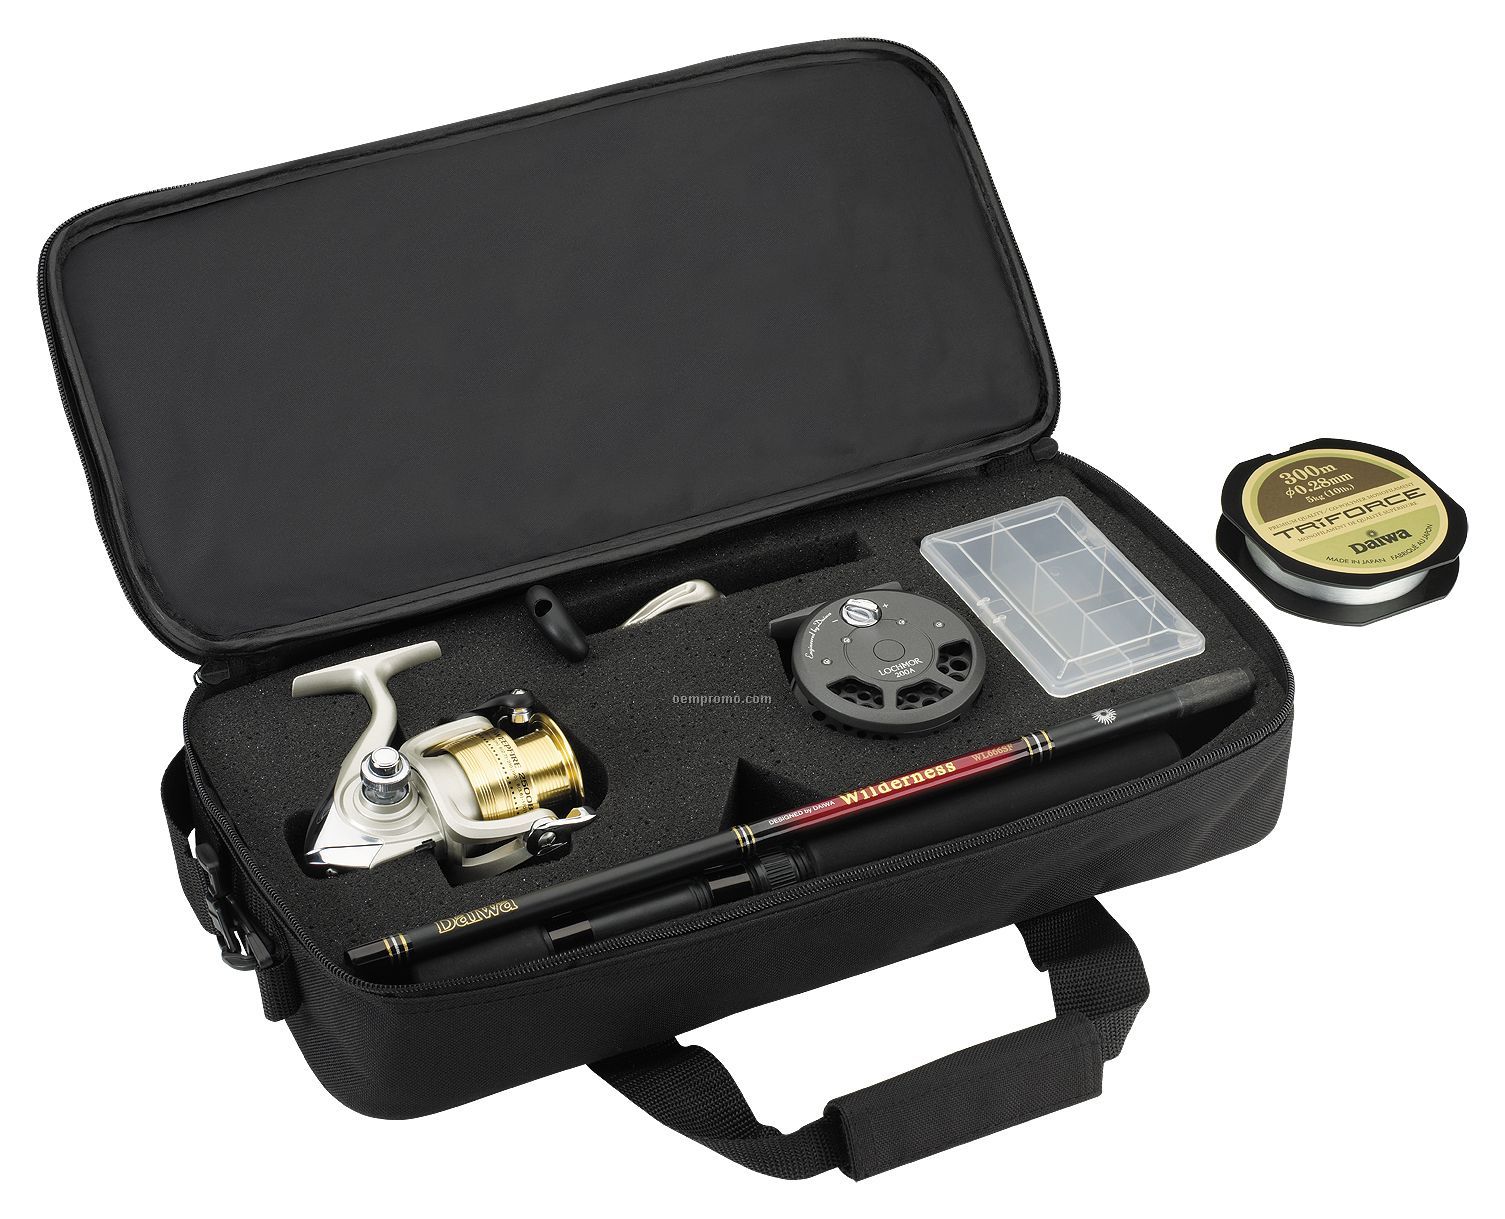 Daiwa Sweepfire Executive Rod & Reel Travel Pack In Soft Case (Fly Reel)